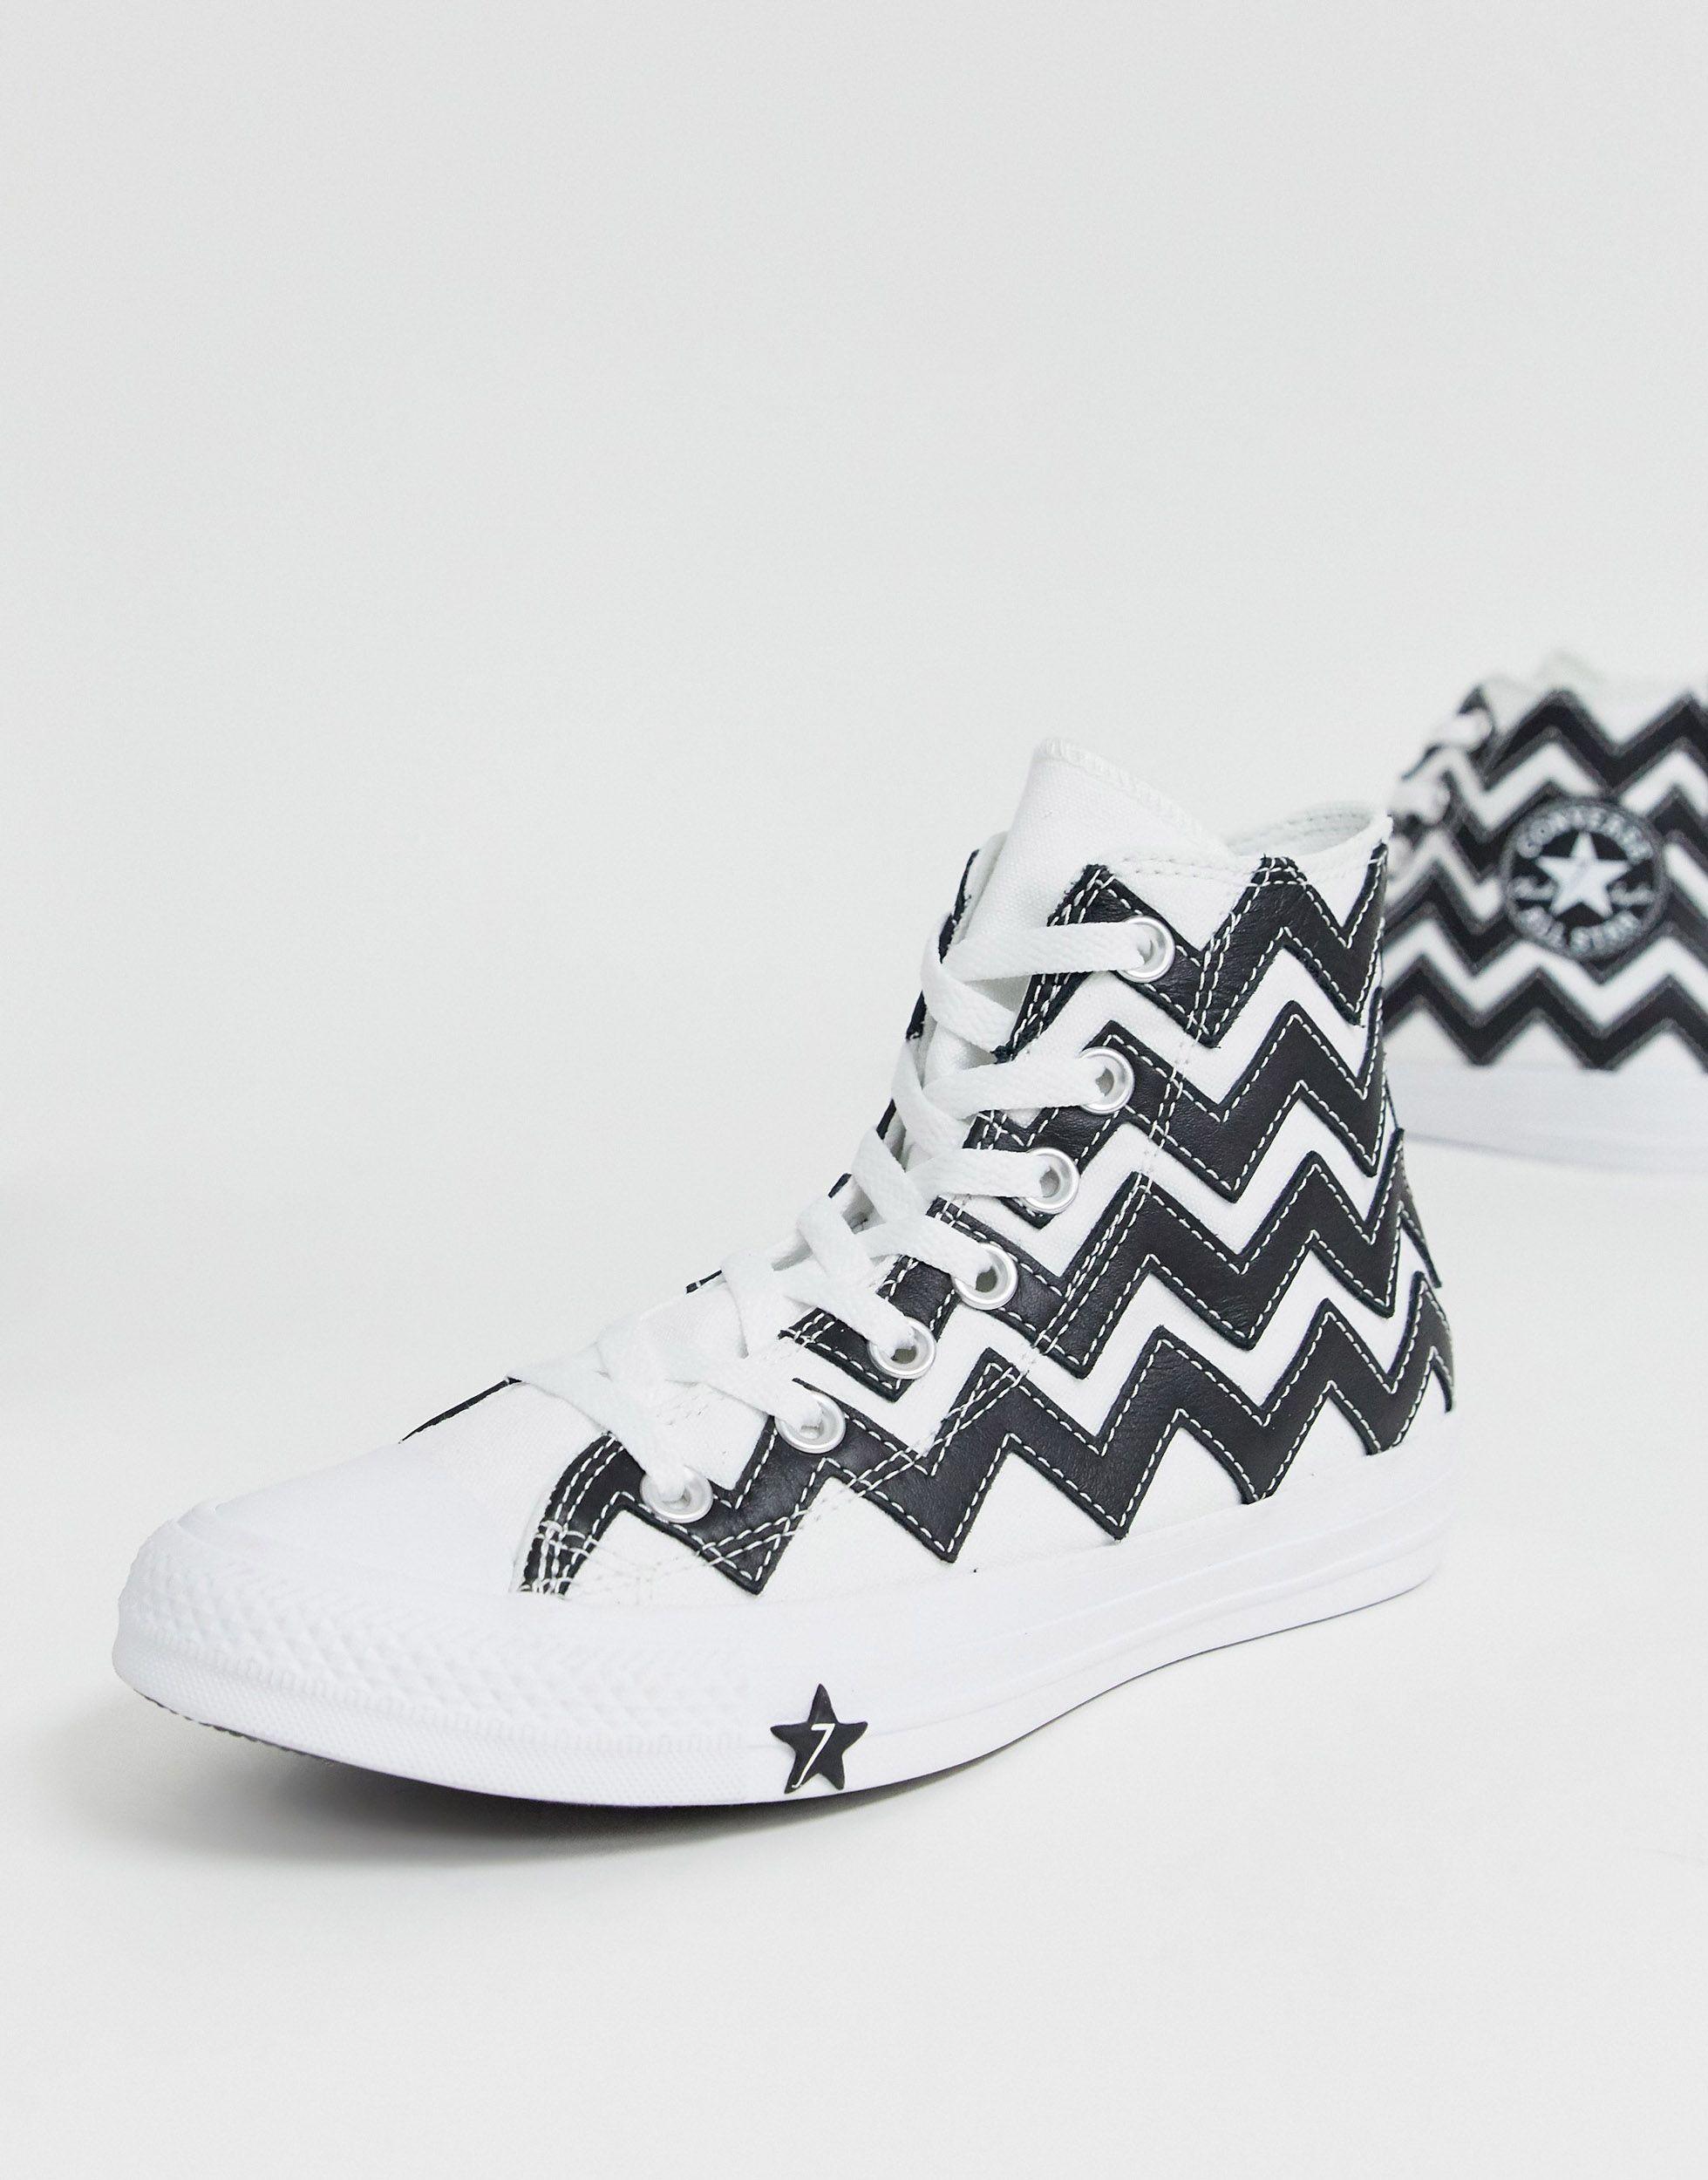 Share 112+ images black and white zig zag converse - In.thptnganamst.edu.vn